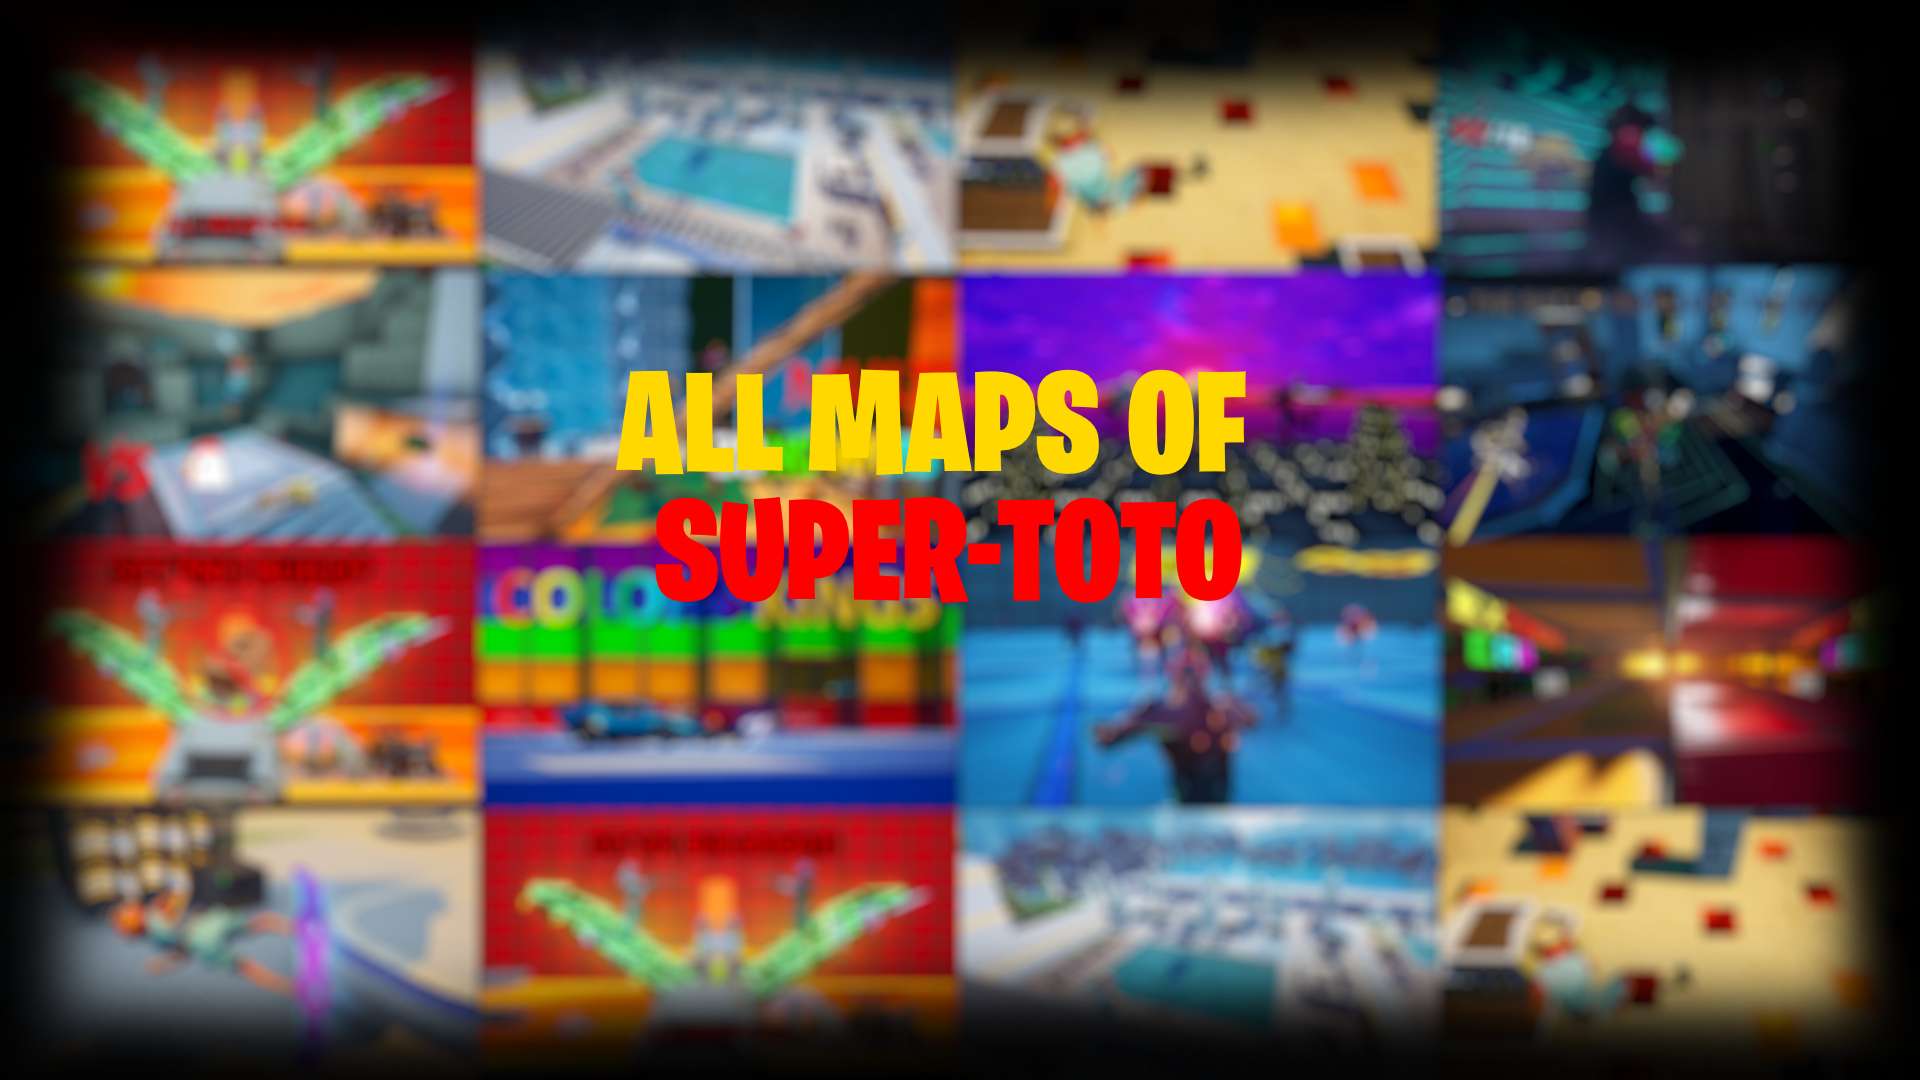 ALL MAPS OF SUPER-TOTO